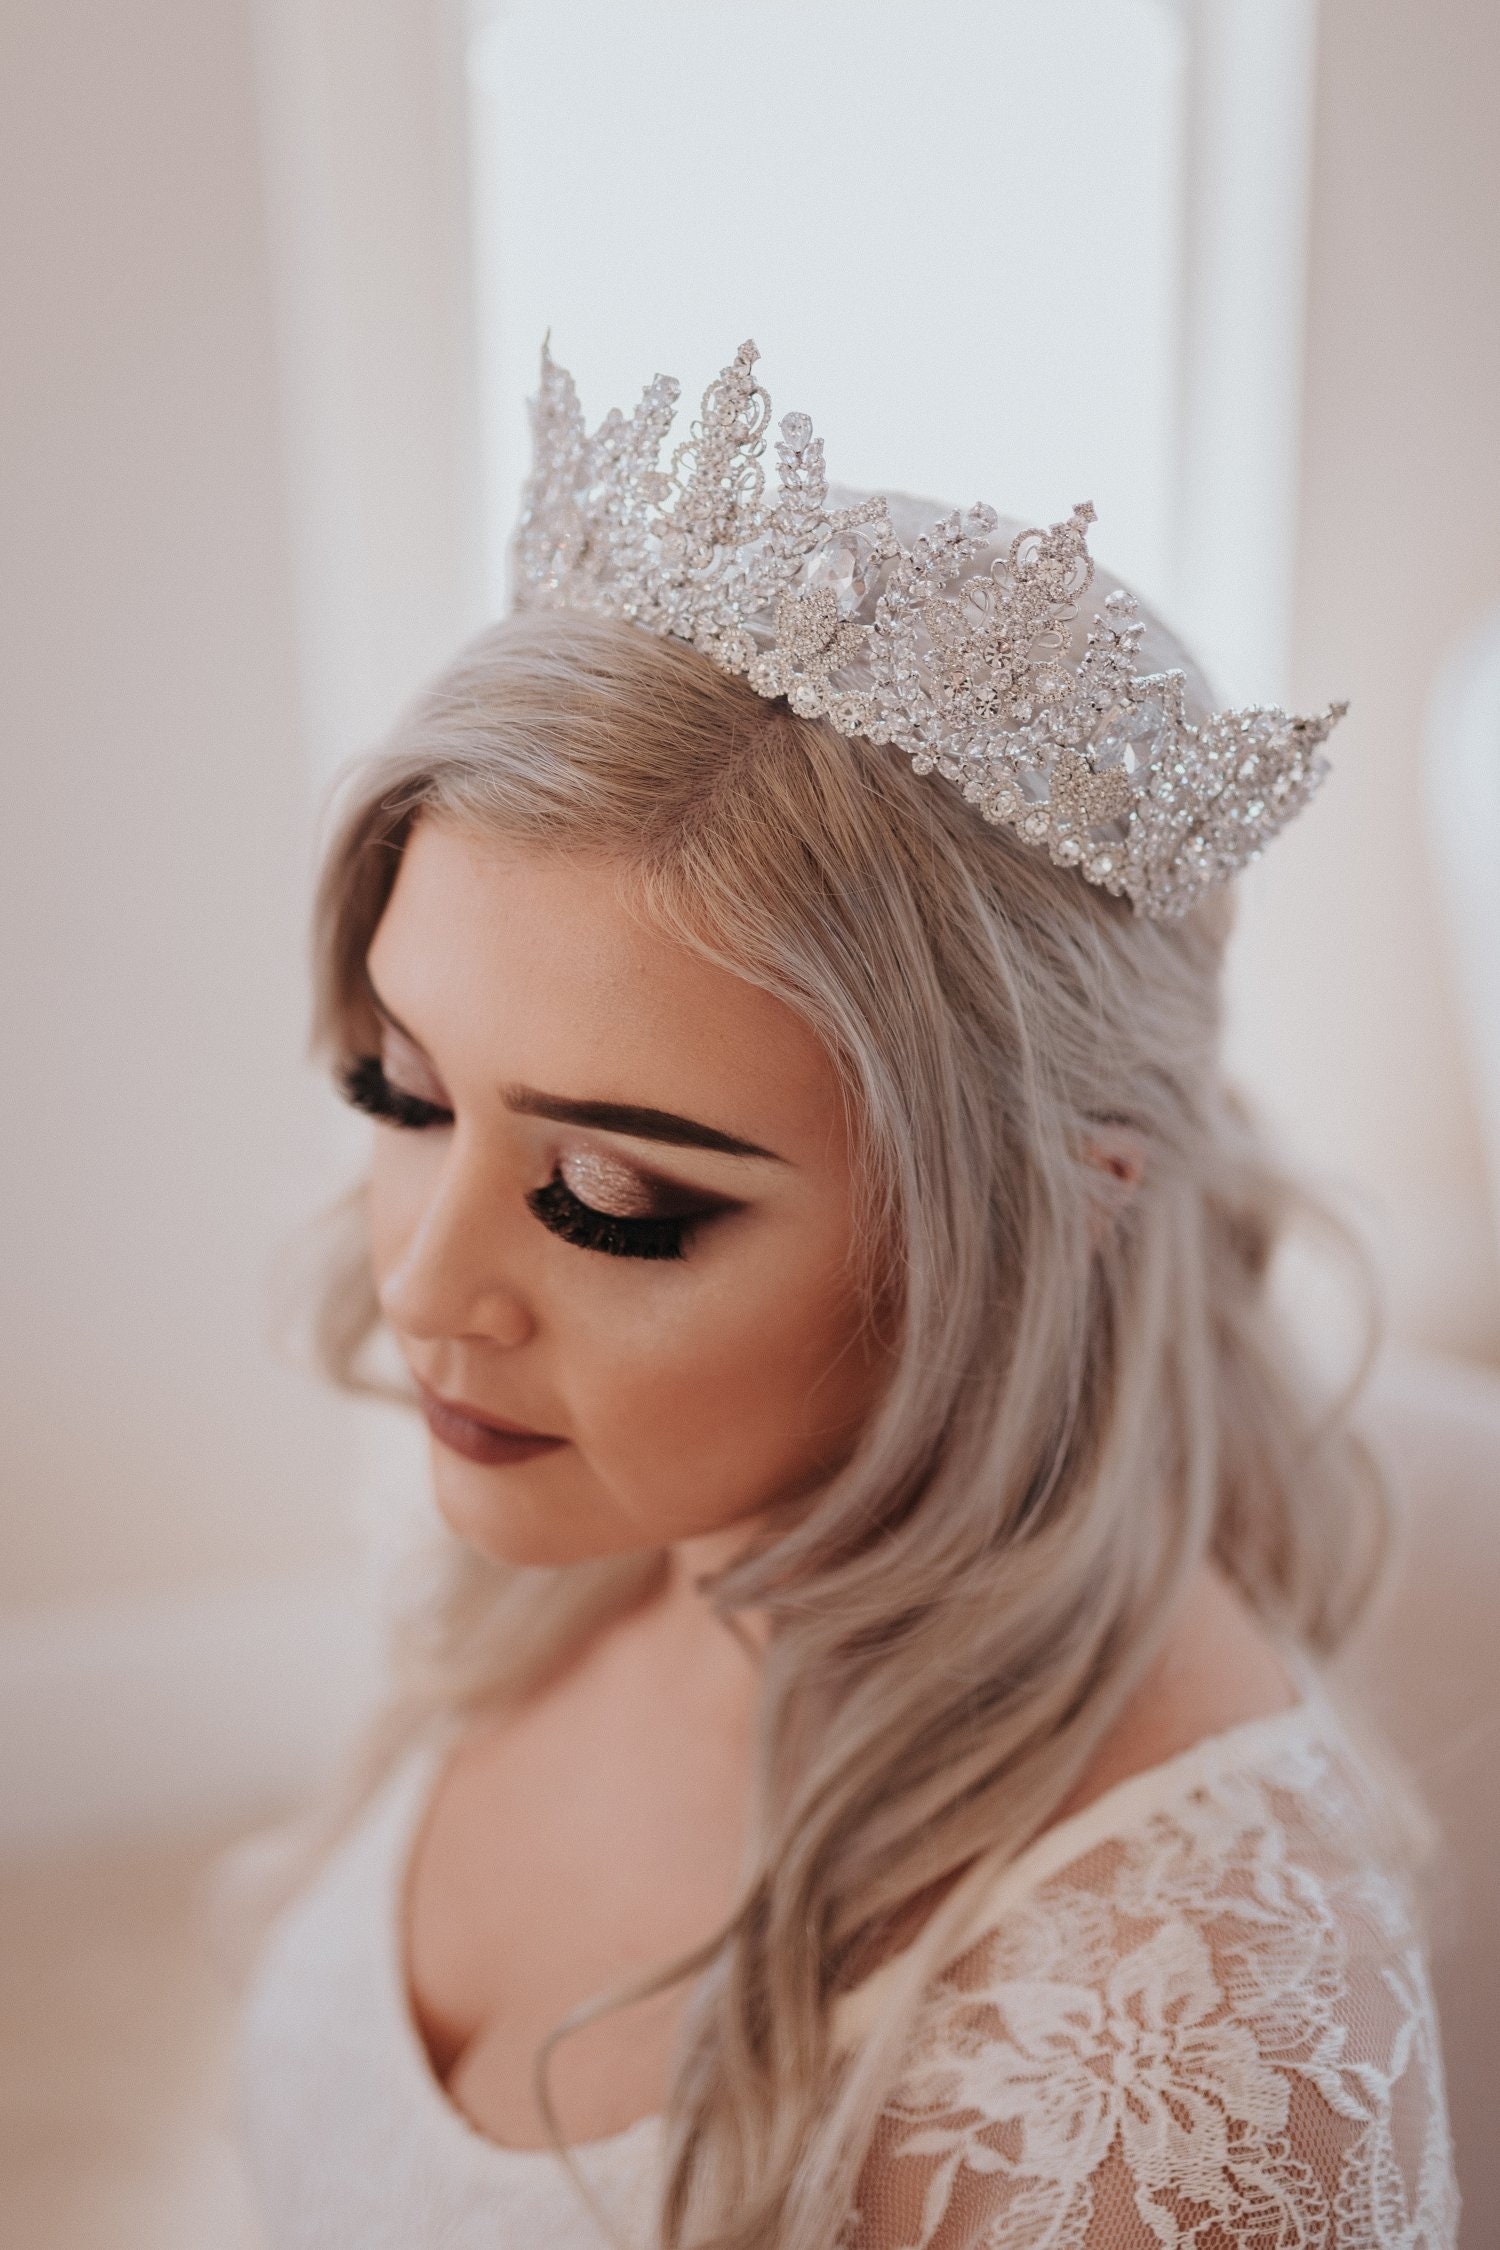 10 Bridal Tiaras That Are the Perfect Crowning Touch for Any